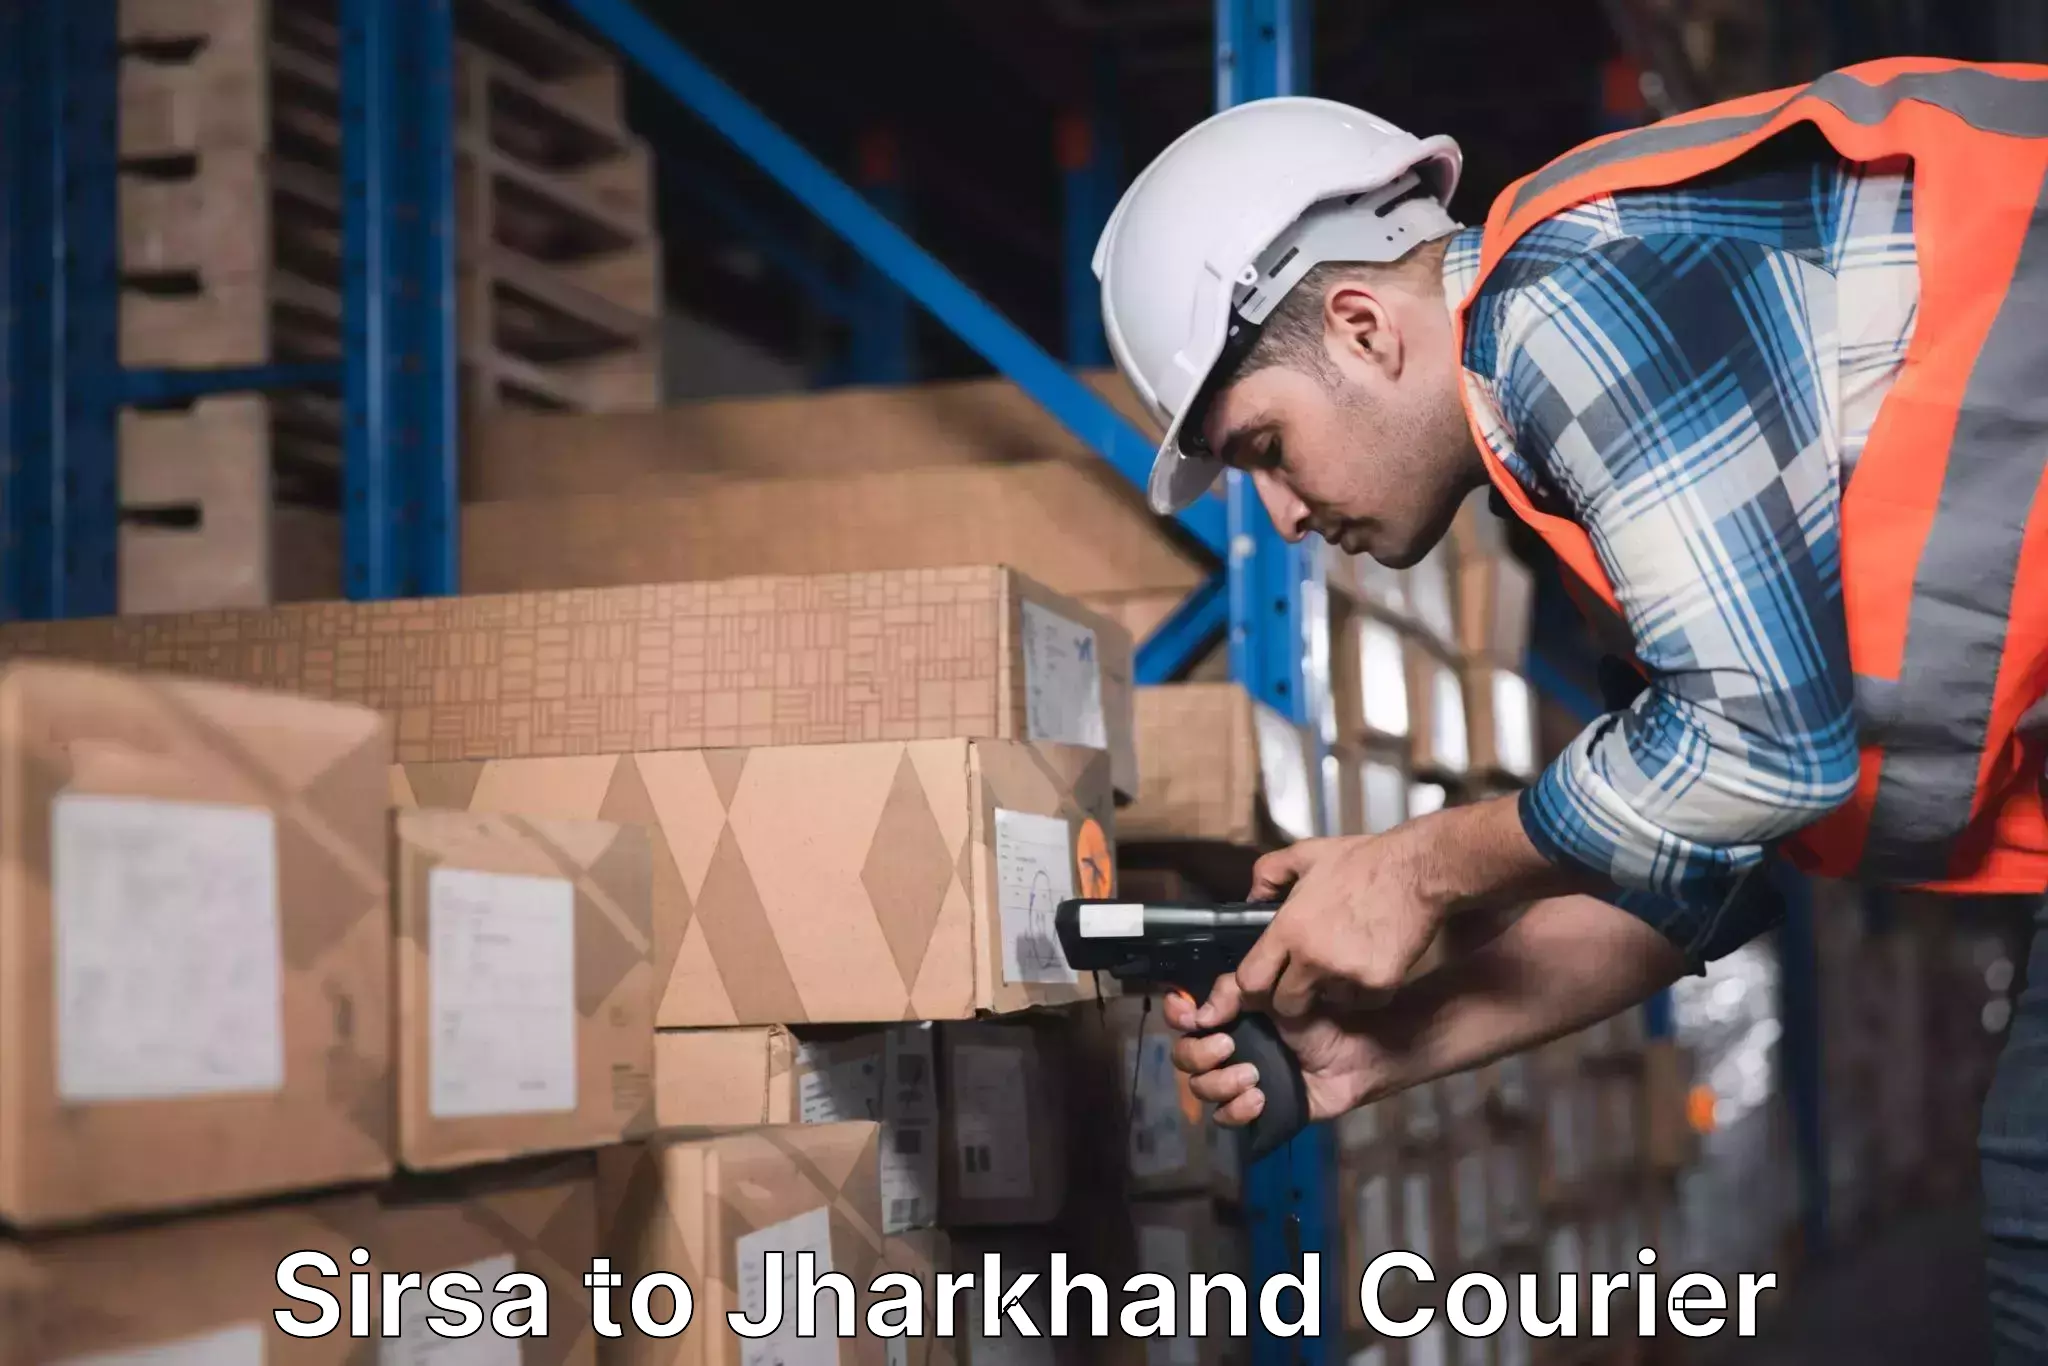 Urban courier service Sirsa to Jharkhand